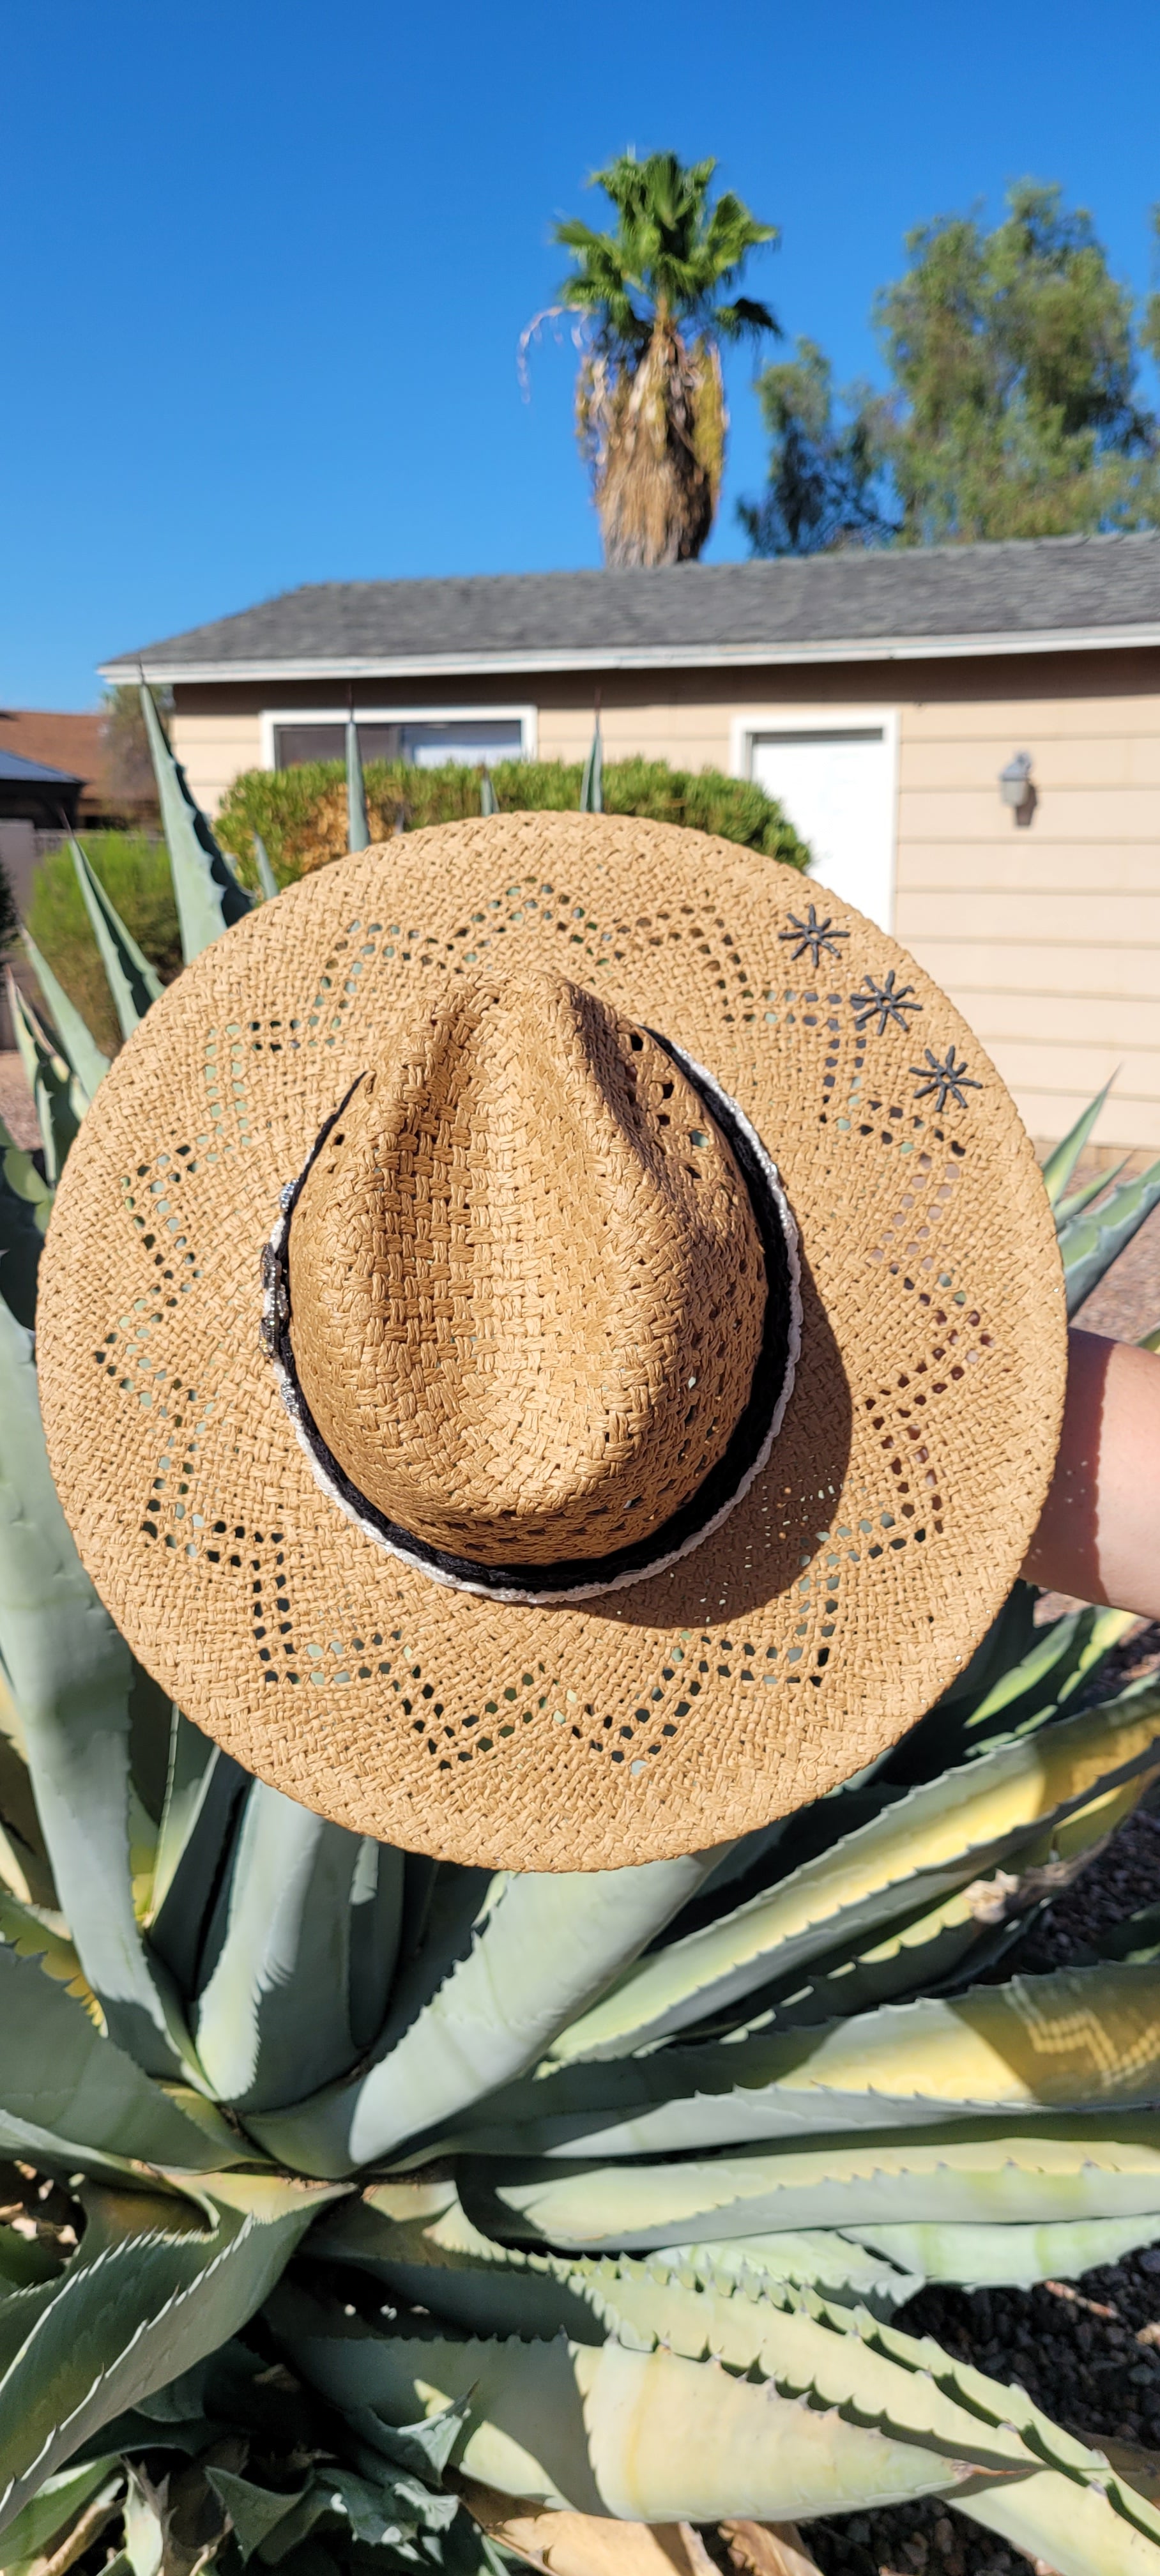 Lace ribbon, pearl ribbon, rowel (boot spur) pistol & decorative brooches Straw hat Flat brim 65% polyester and 35% cotton Ribbon drawstring for hat size adjustment Head Circumference: 24" Crown Height: 5" Brim Length: 15.75" Brim Width: 14.75" Branded & numbered inside crown Custom designed by Kayla